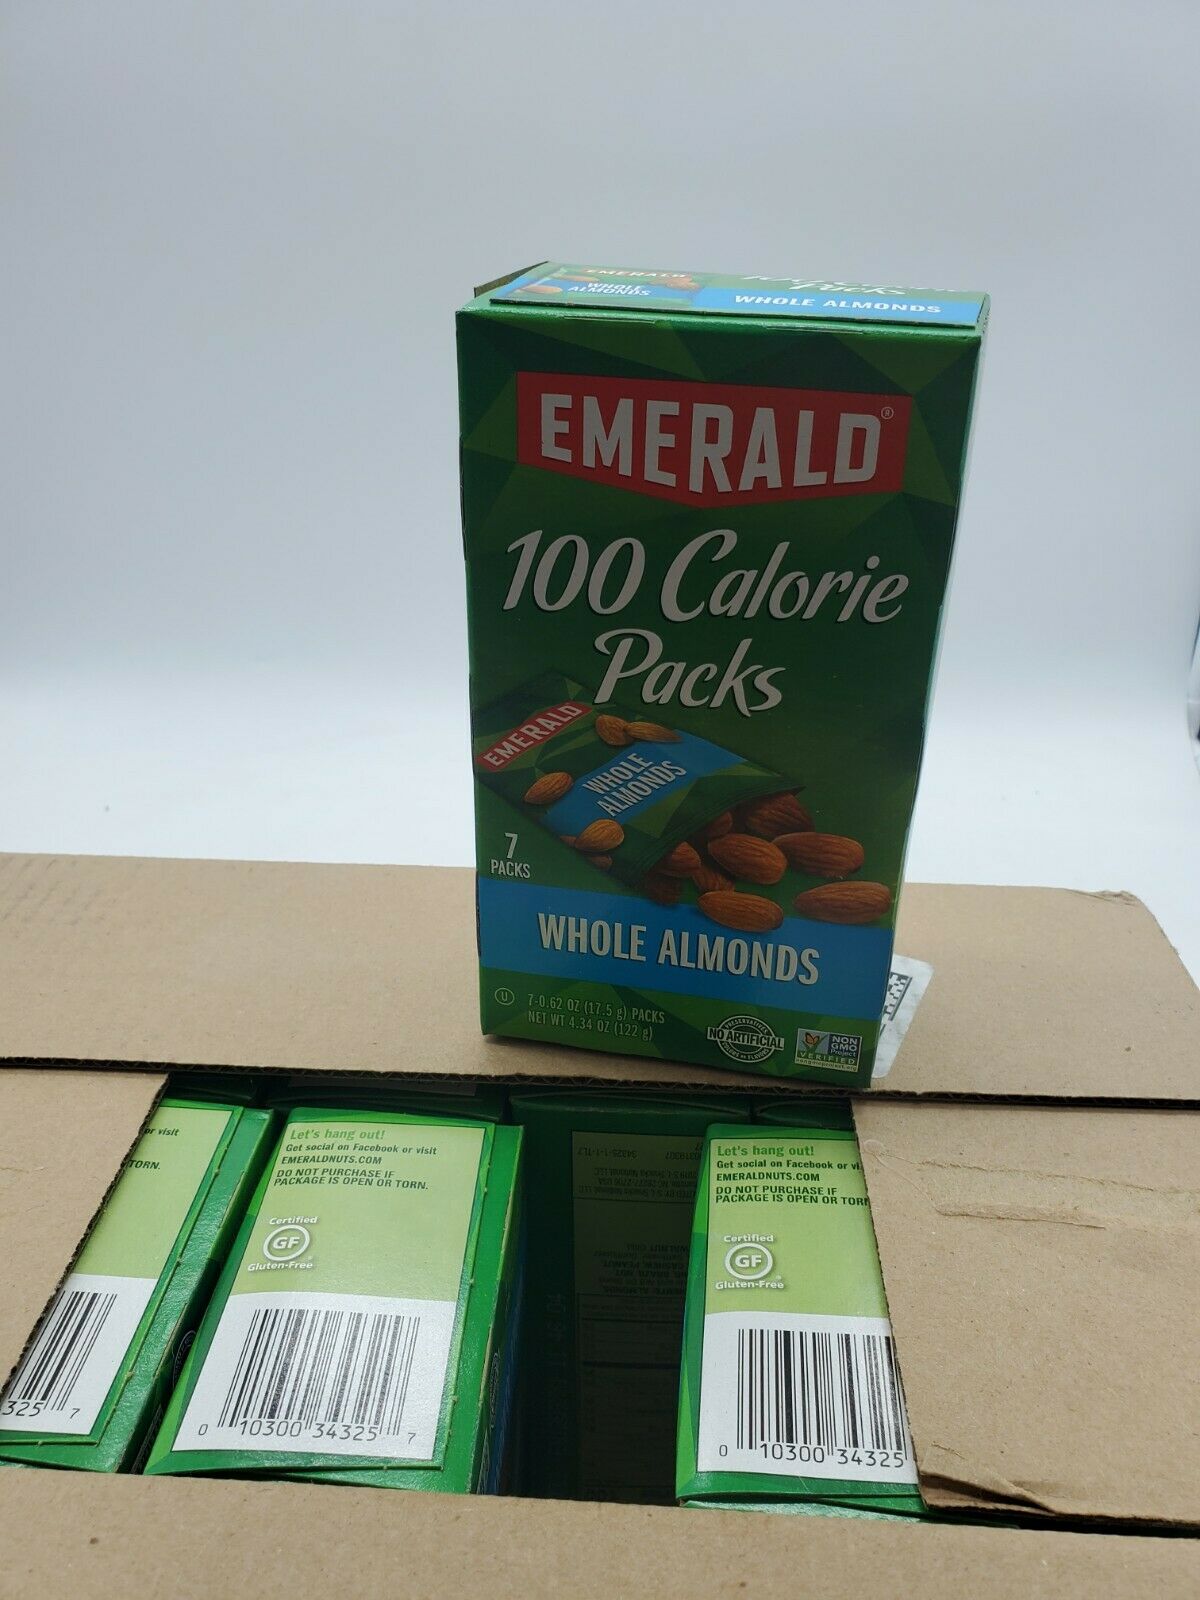 12 Boxes Emerald Nuts Natural Whole Almonds, 100 Calorie Packs, 84 Ct